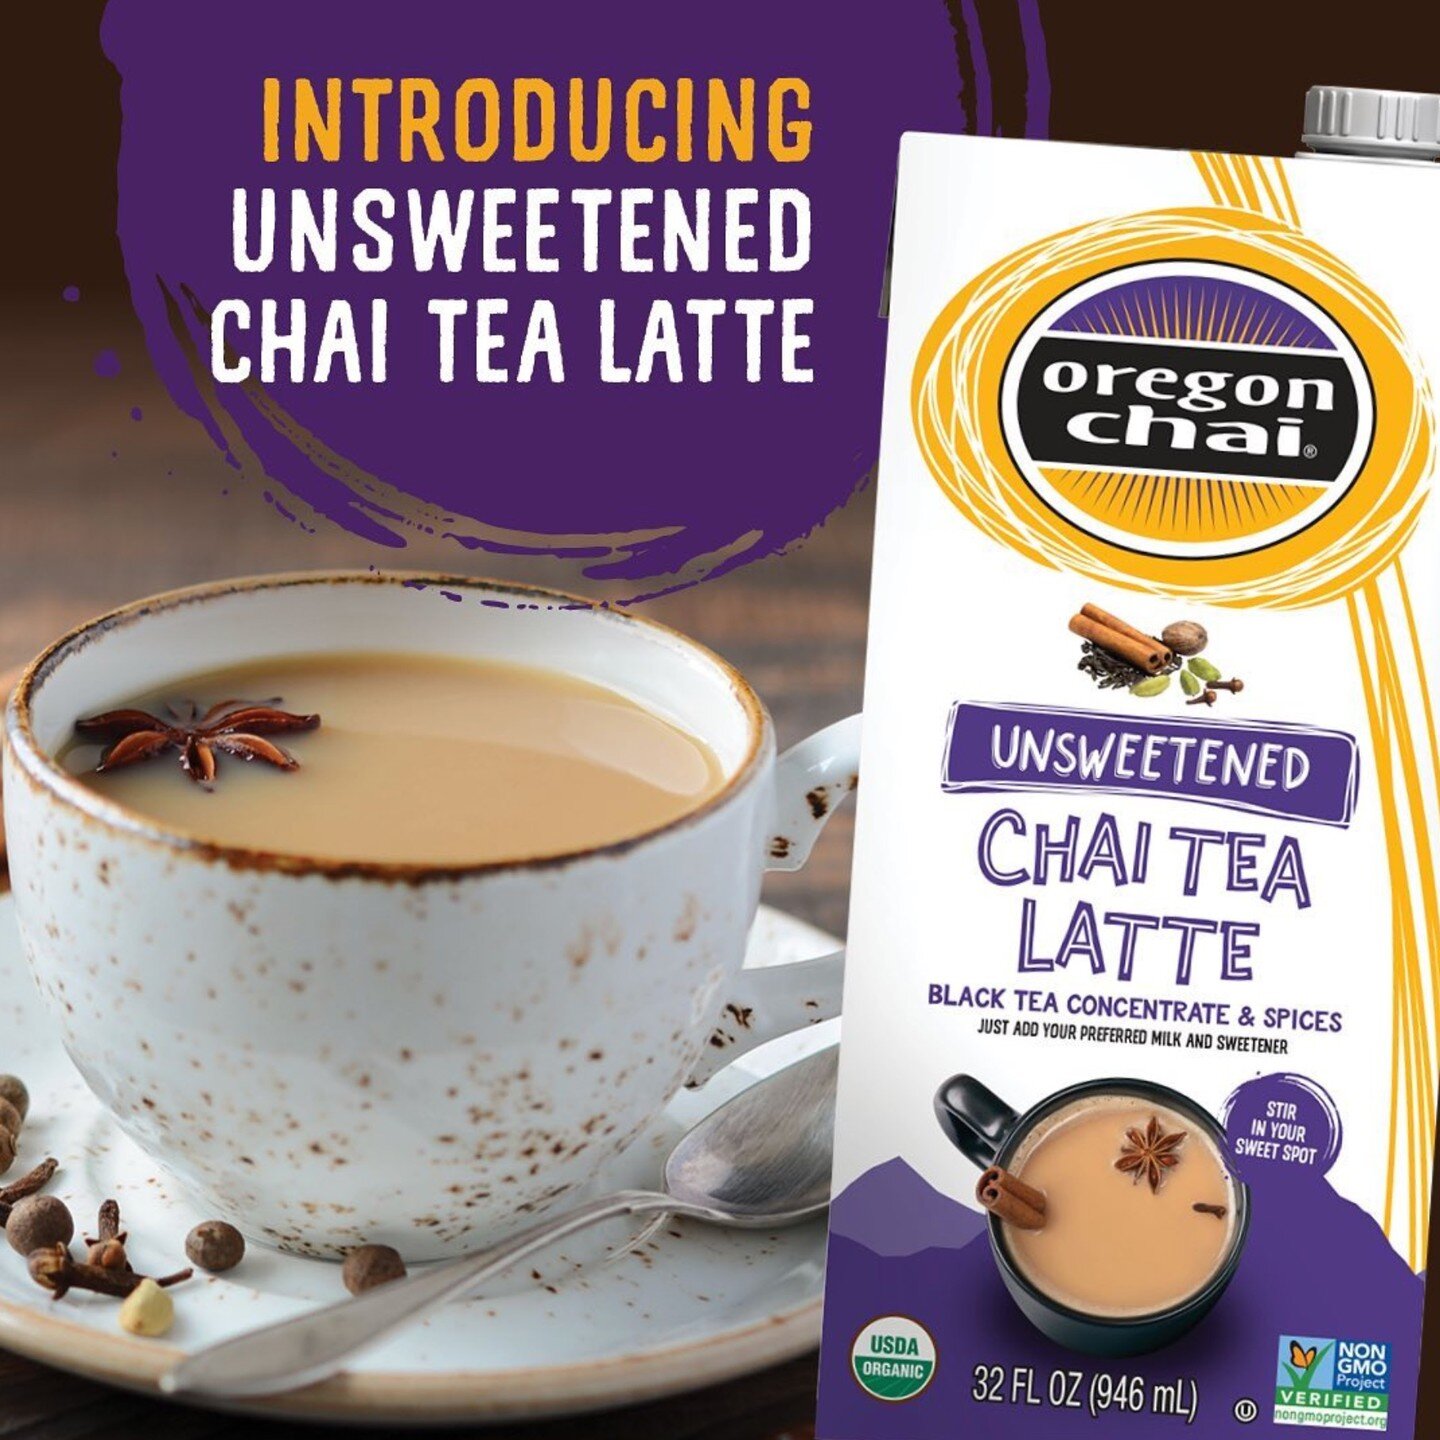 Make chai your way. Oregon Chai Unsweetened Chai Tea Latte is fully customizable for your taste or health preferences. Add a little honey, agave or whatever hits your sweet spot.

Learn more at the link in our bio!

#oregonchai #chaitealatte #sponsor